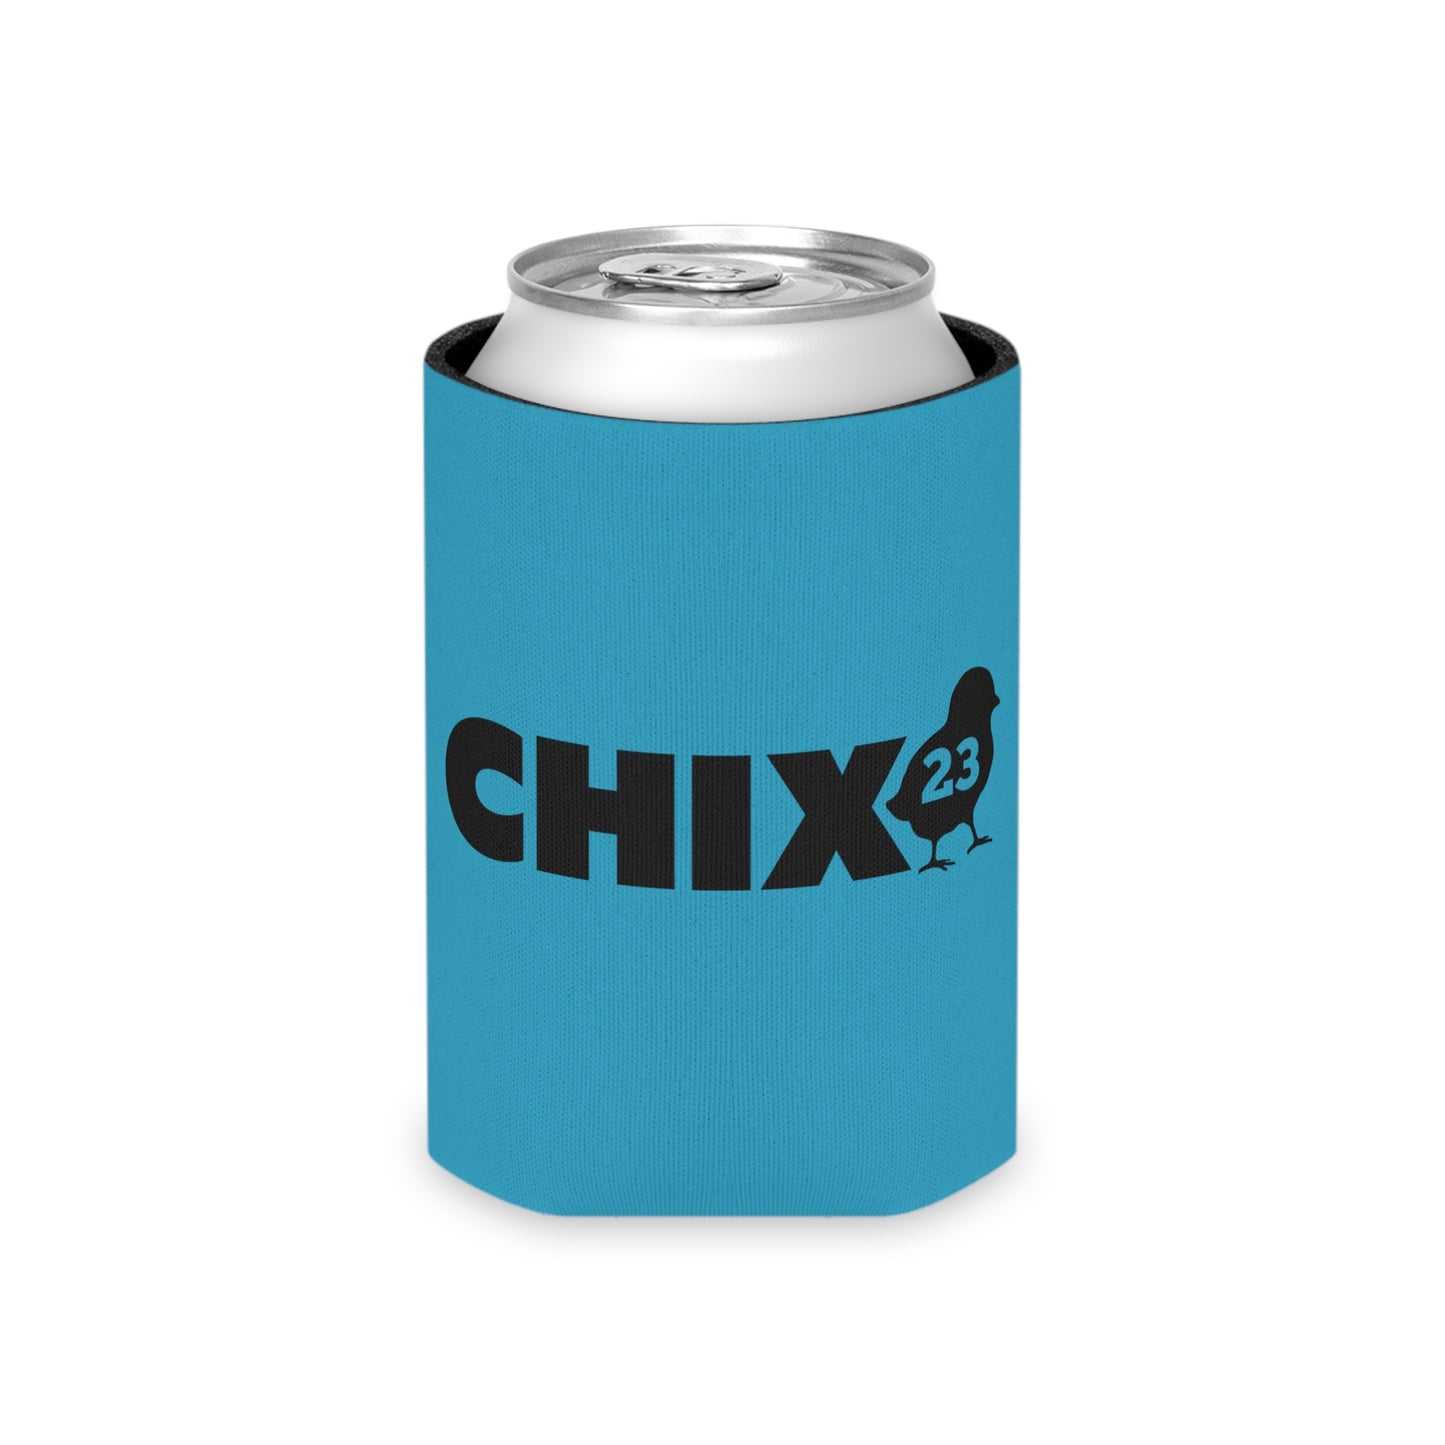 Regular Can Cooler - black on turquoise